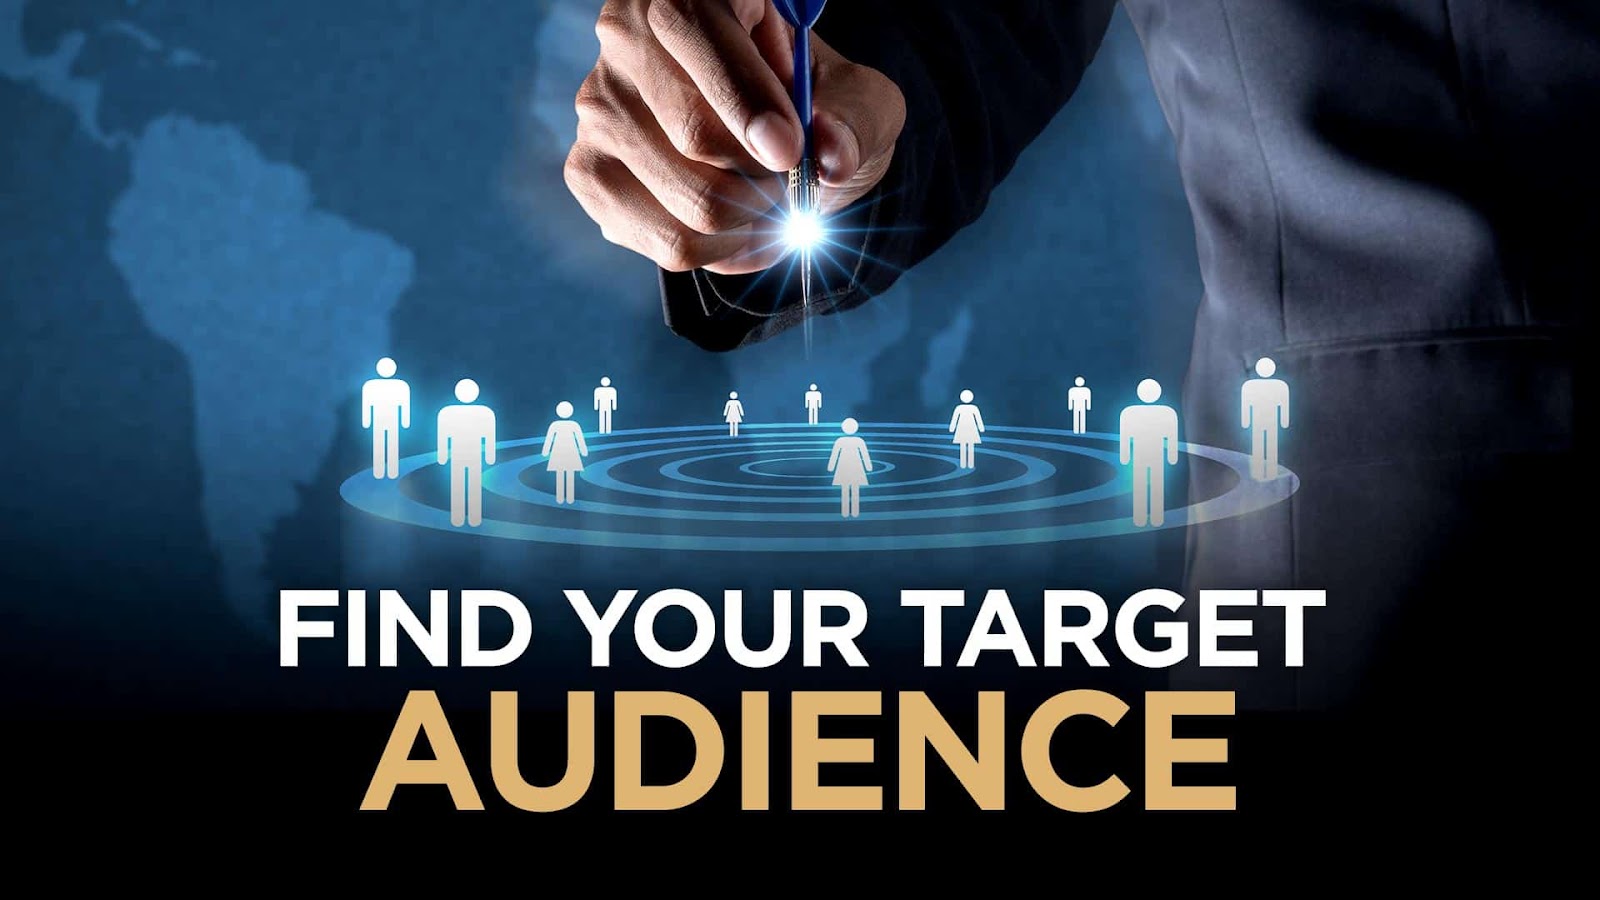 9 Reasons to Consider Students as Your Target Audience